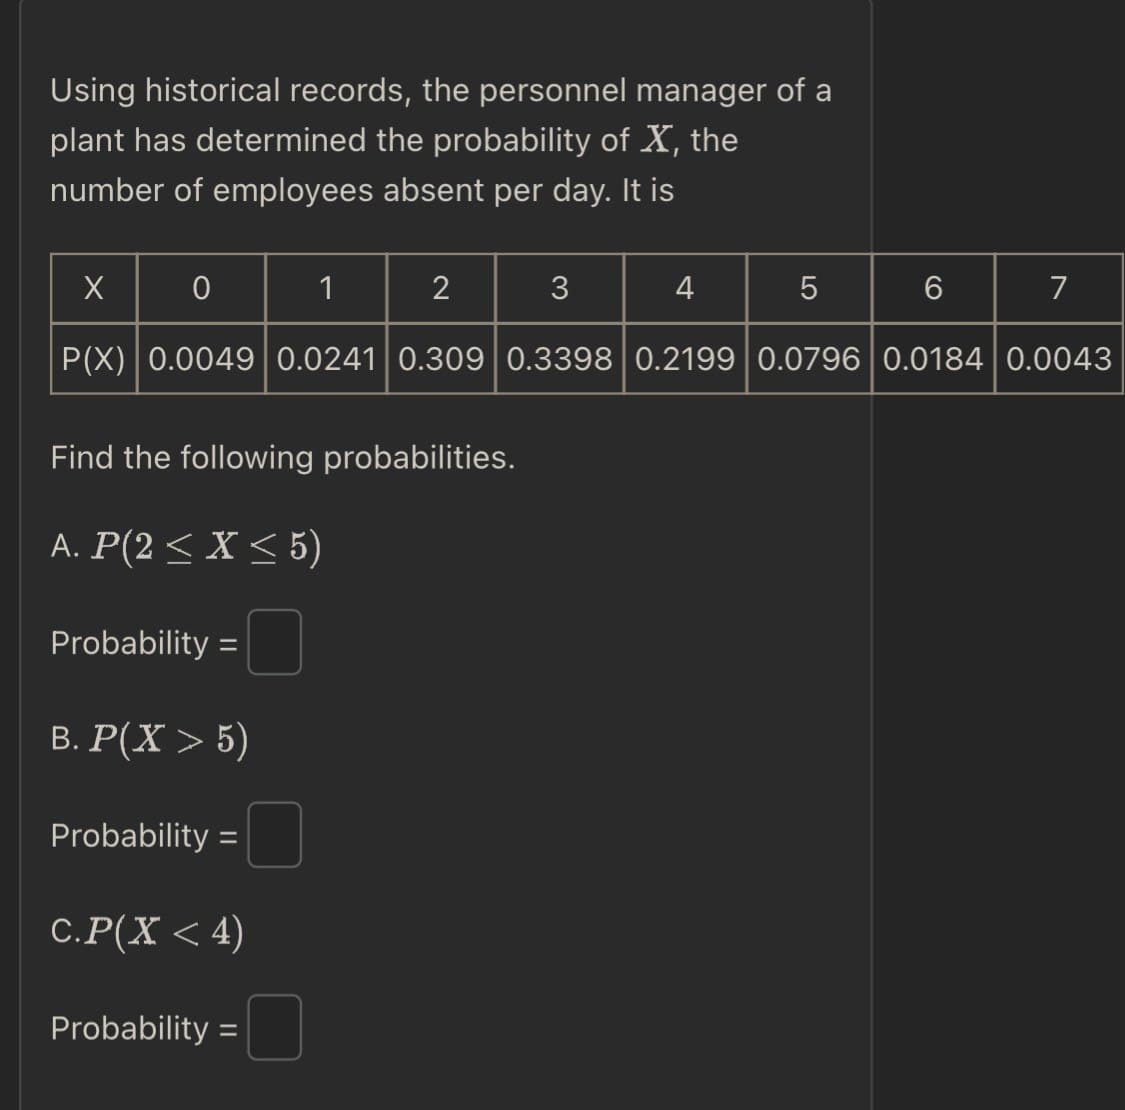 Using historical records, the personnel manager of a
plant has determined the probability of X, the
number of employees absent per day. It is
X
0
1
2
3
4
5
6
7
P(X) 0.0049 0.0241 0.309 0.3398 0.2199 0.0796 | 0.0184 0.0043
Find the following probabilities.
A. P(2≤ X ≤5)
Probability =
B. P(X > 5)
Probability =
C.P(X <4)
Probability =